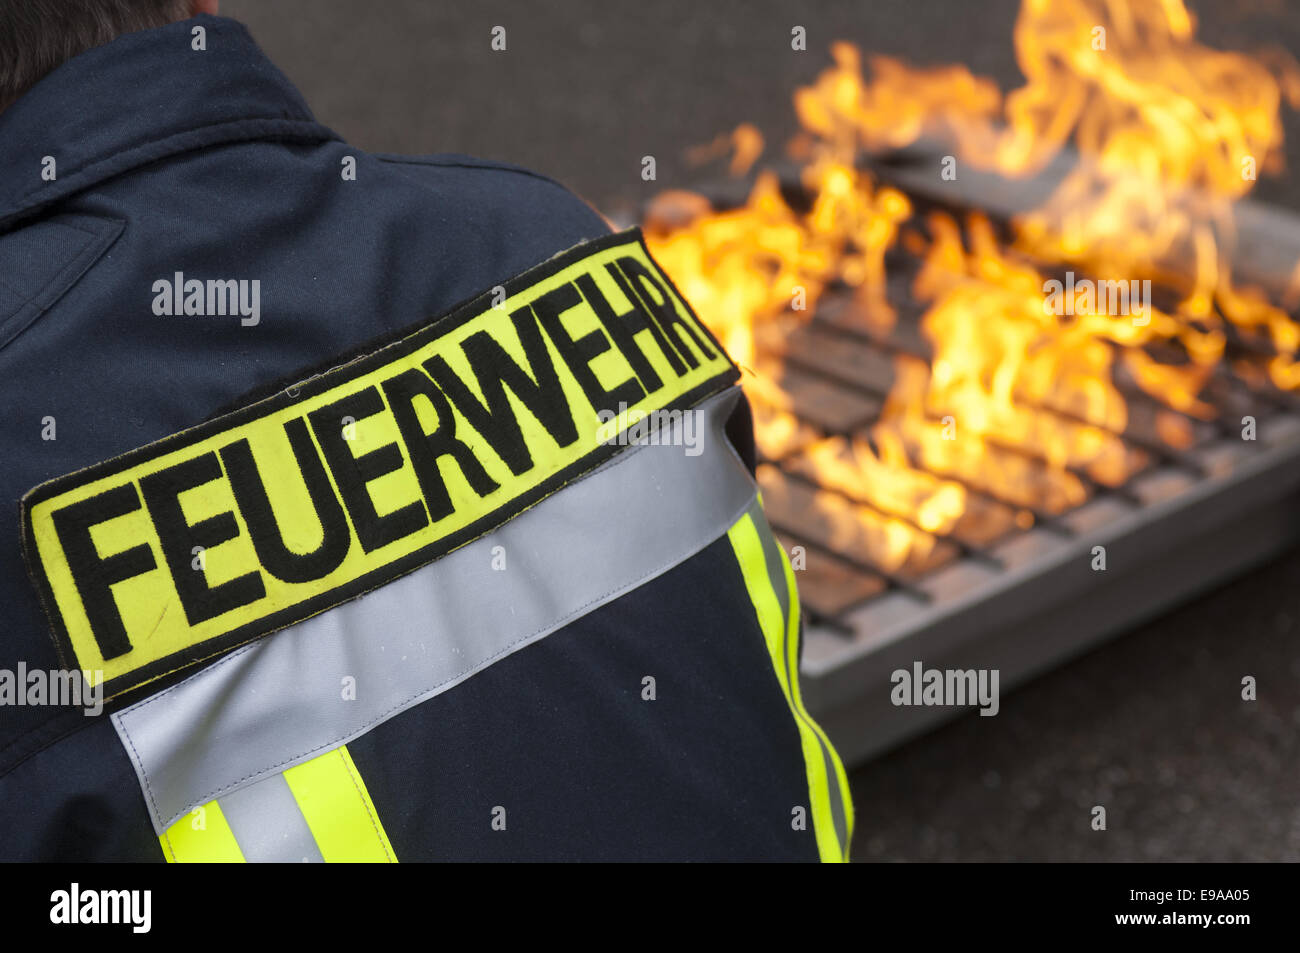 Fireman in front of a fire place Stock Photo